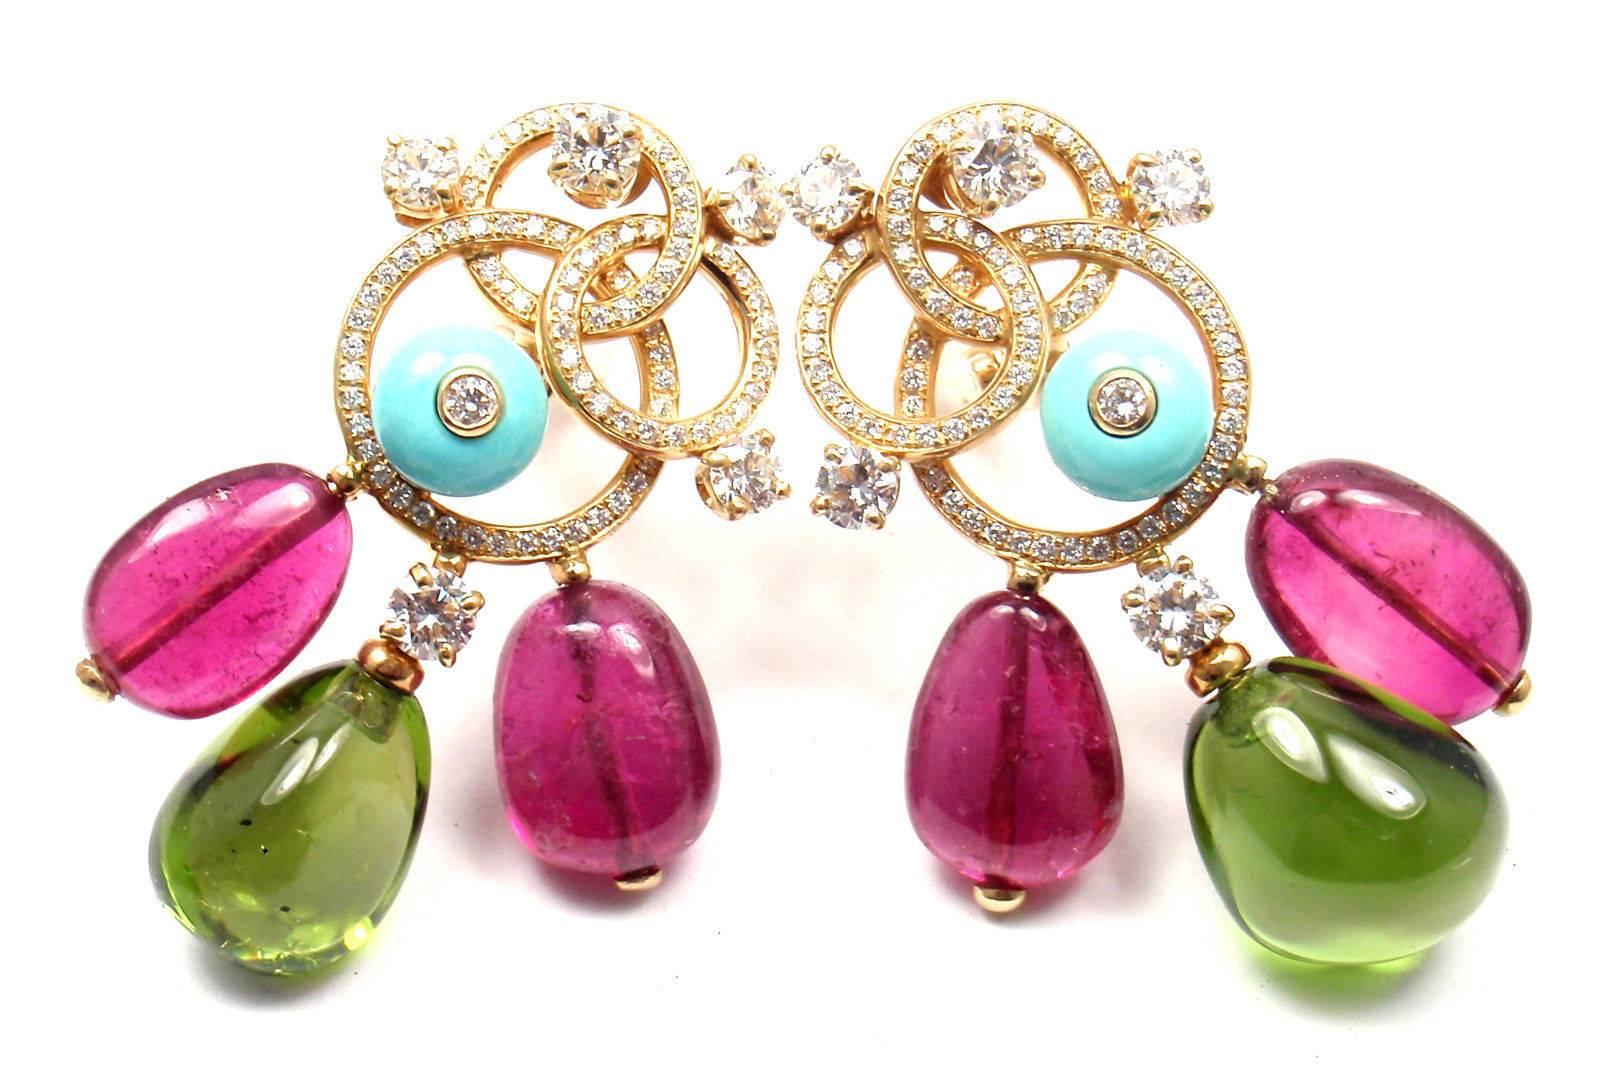 18k yellow gold diamond, turquoise, pink and green tourmaline earrings by Bulgari.
With 166 round brilliant cut diamonds VS1 clarity, E color total weight approx. 3ct
2 Green Tourmalines 10mm x 8mm each
4 Pink Tourmalines 9mm x 10mm each
2 Turqouise